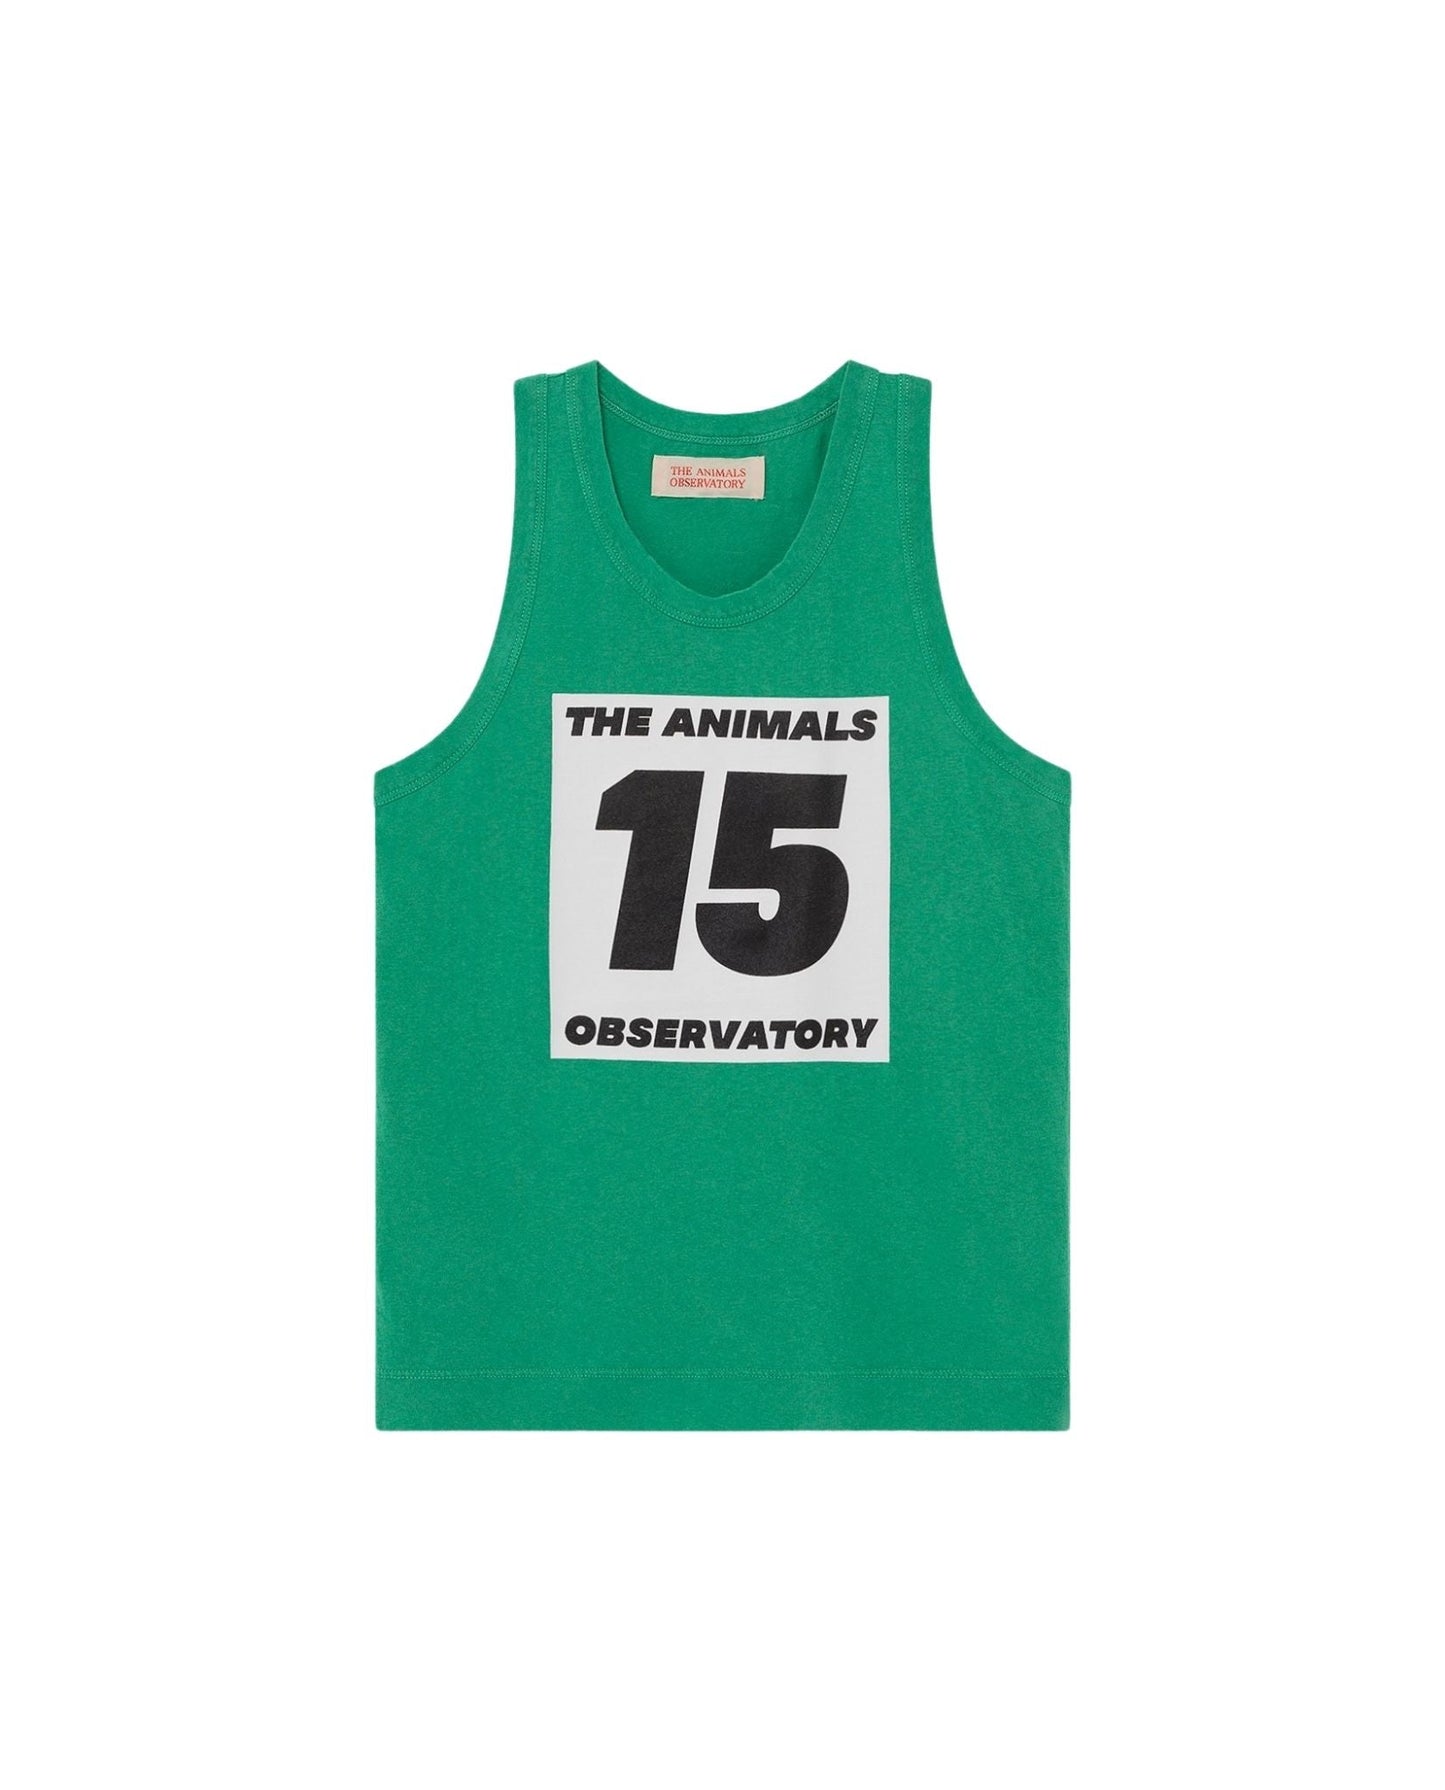 Tank Frog kids t-shirt Green 15 Tops The Animals Observatory 